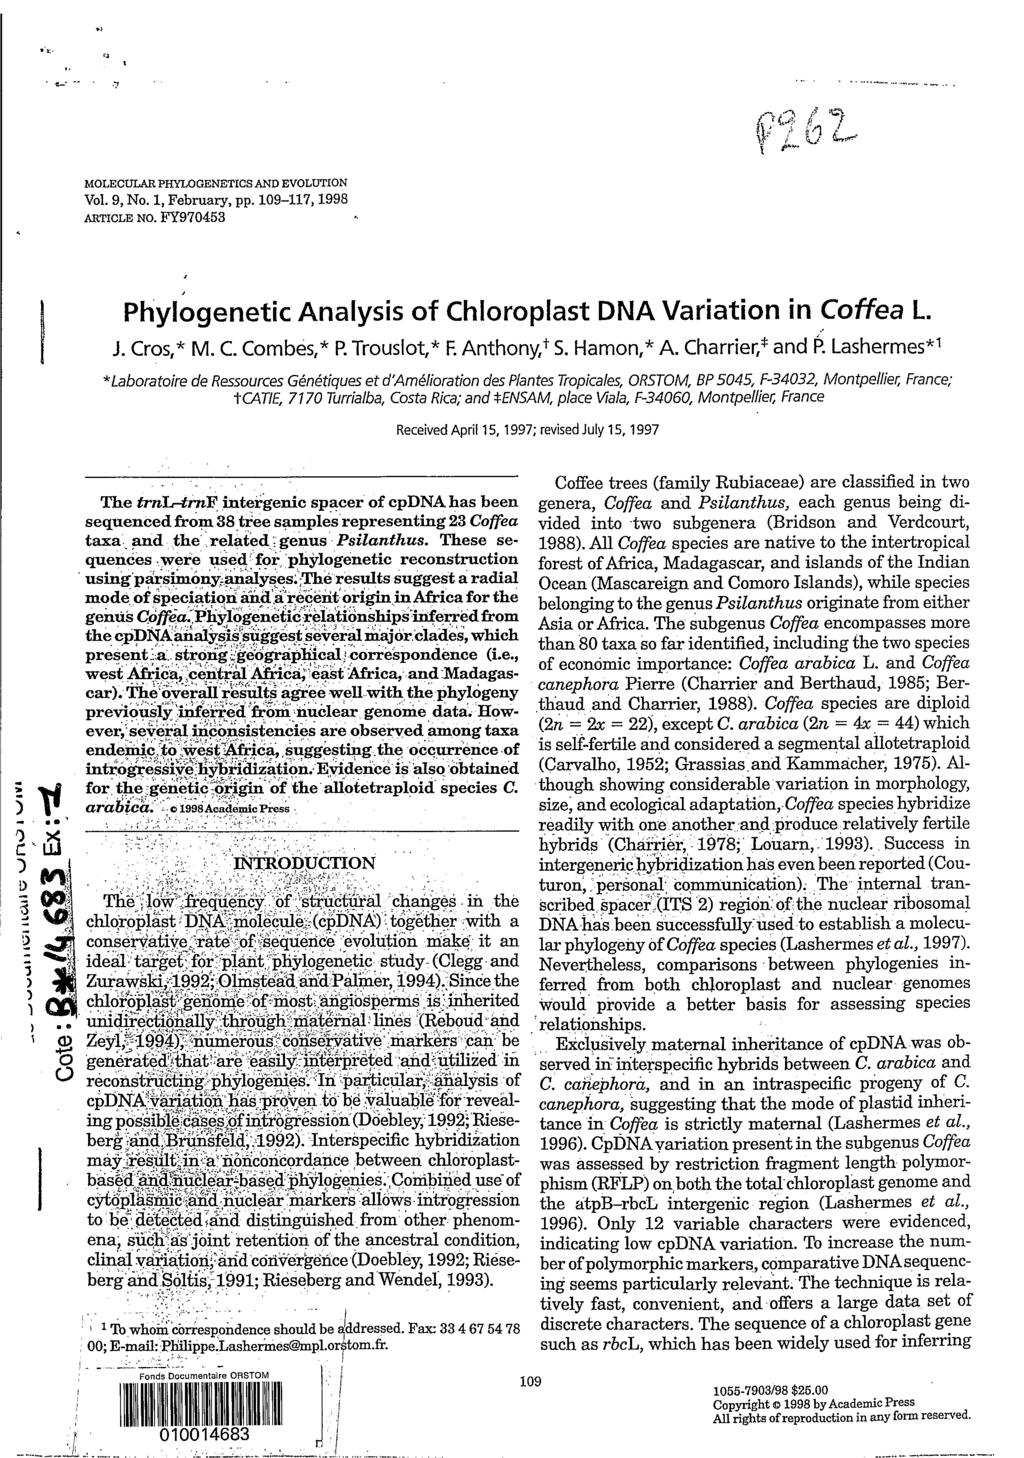 _" MOLECULAR PHYLOGENETICS AND EVOLUTION Vol 9, No 1, February, pp 109-117,1998 ARTICLE NO FY970453 Phylogenetic Analysis of Chloroplast DNA Variation in Coffea L J Cros,* M C Combes,* P Trouslot,* F